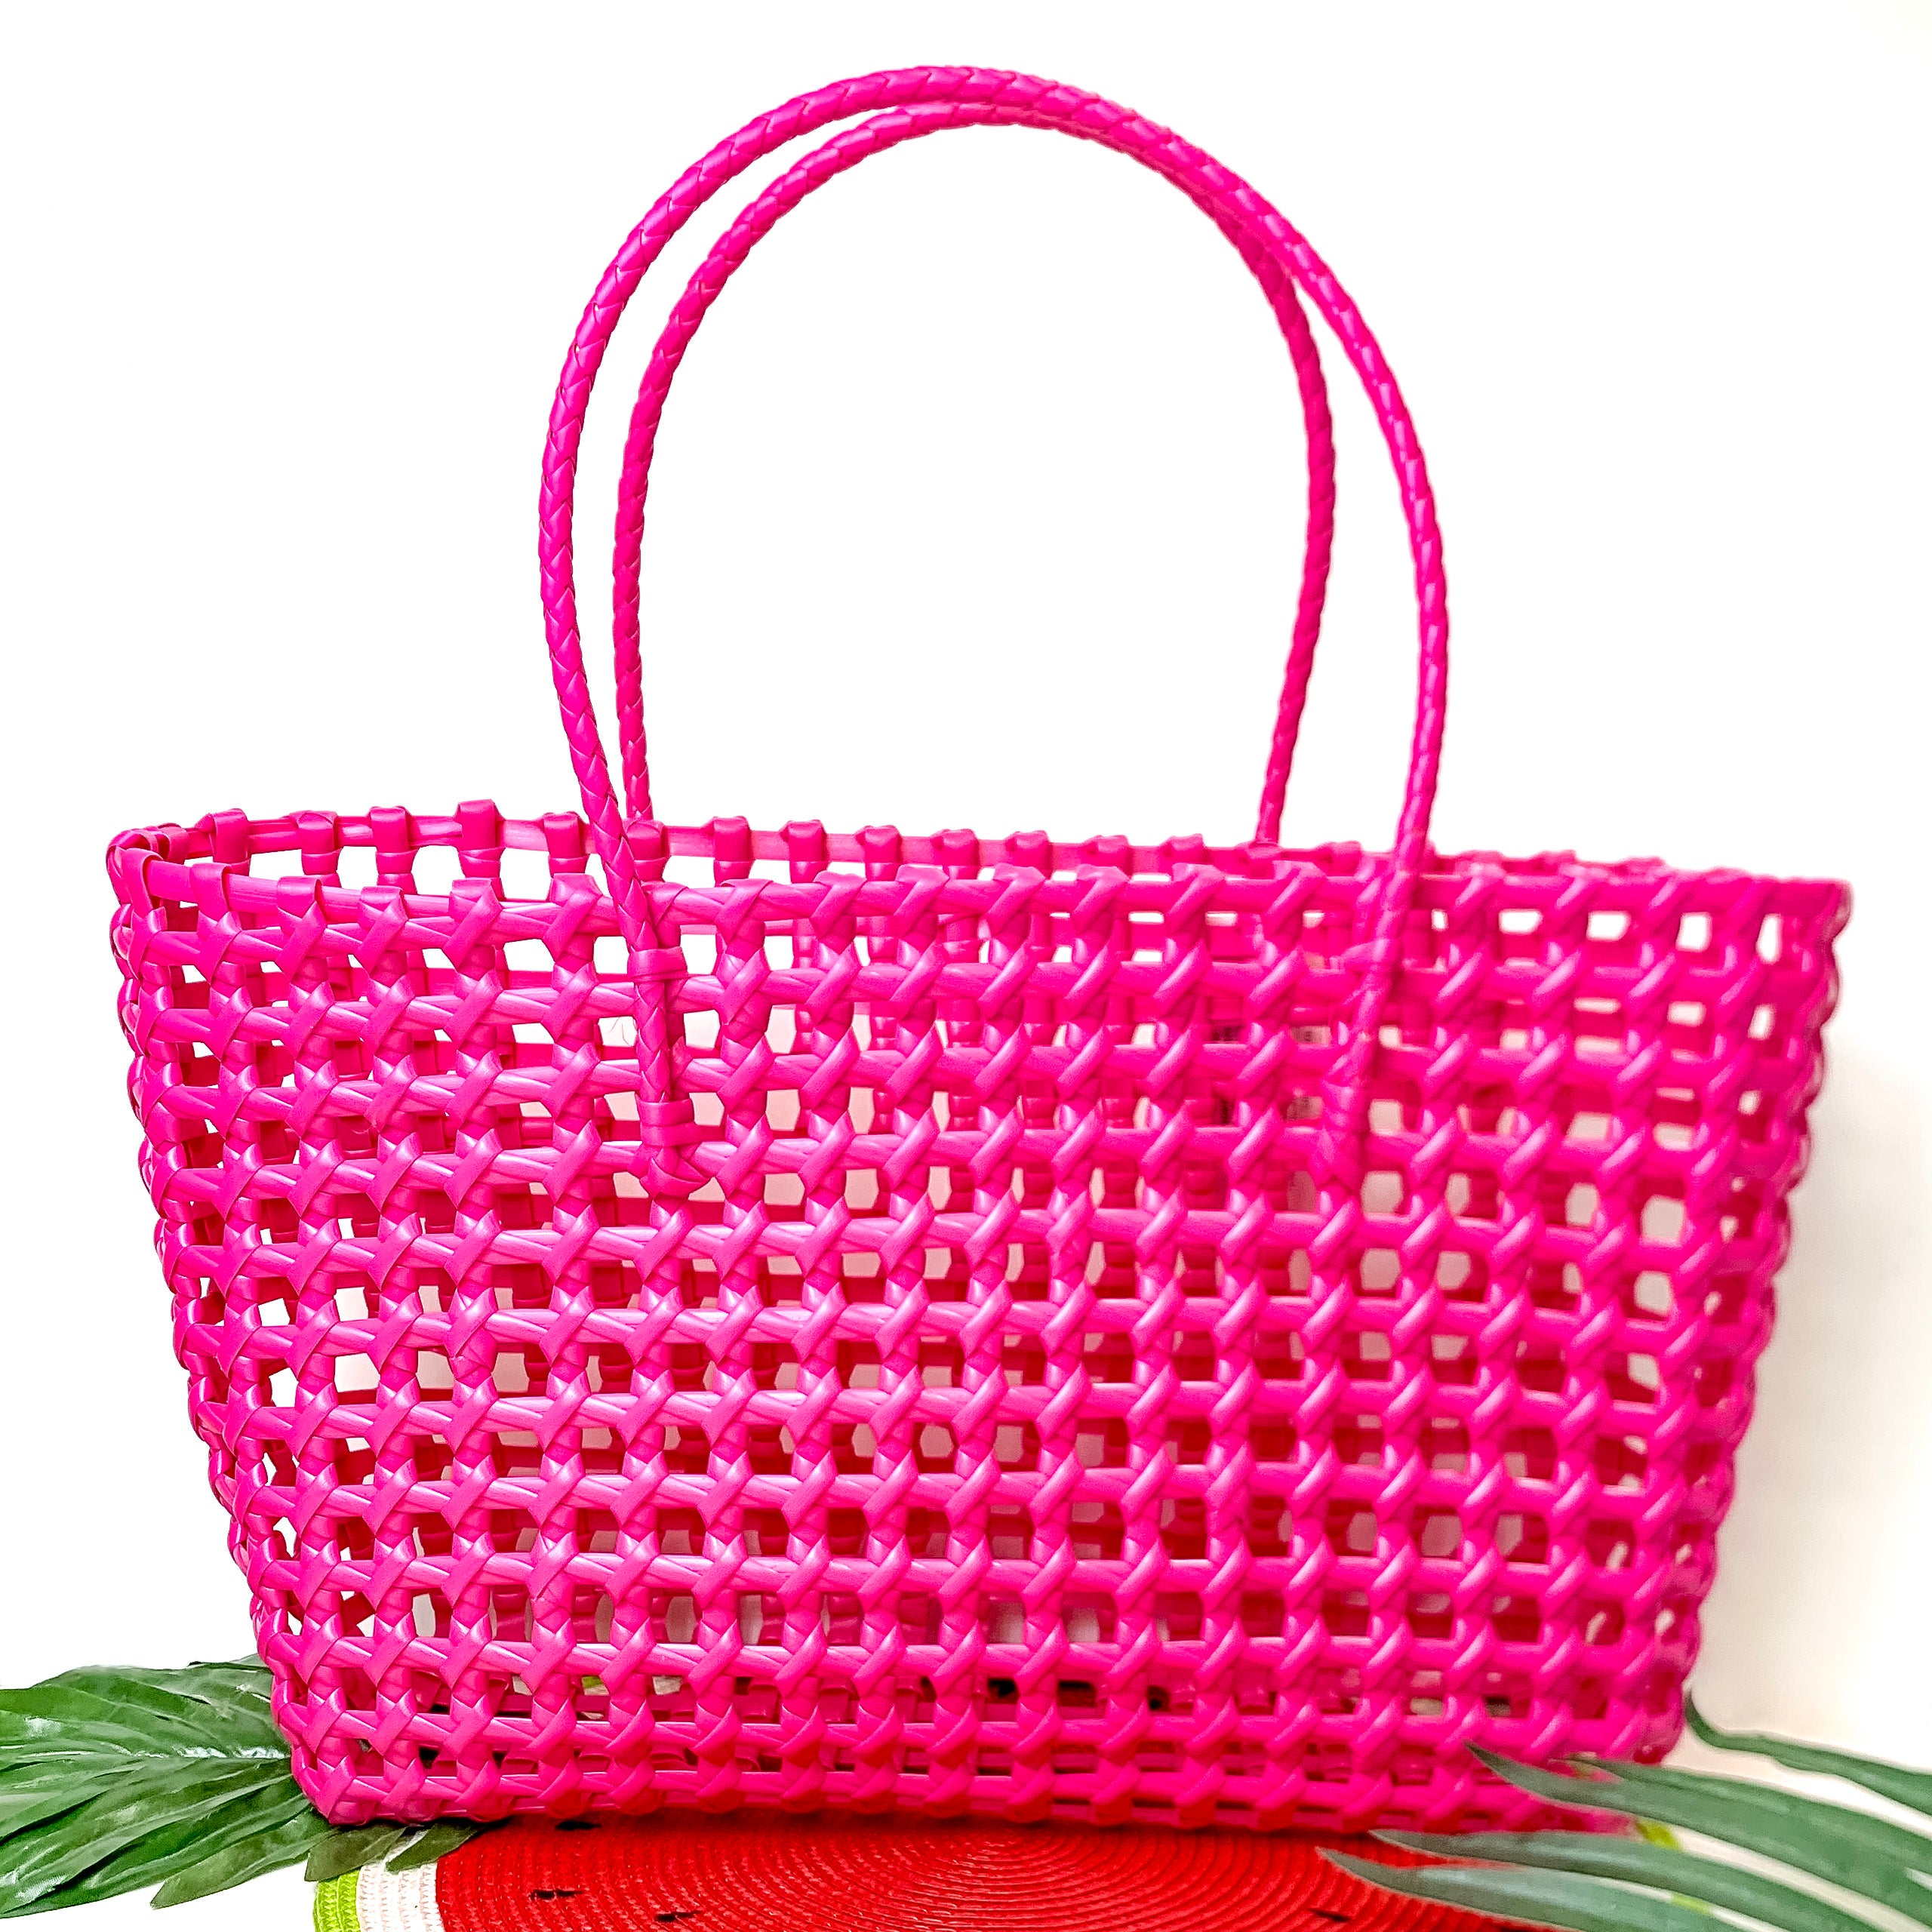 Beachy Brights Basket Tote Bag in Neon Pink - Giddy Up Glamour Boutique